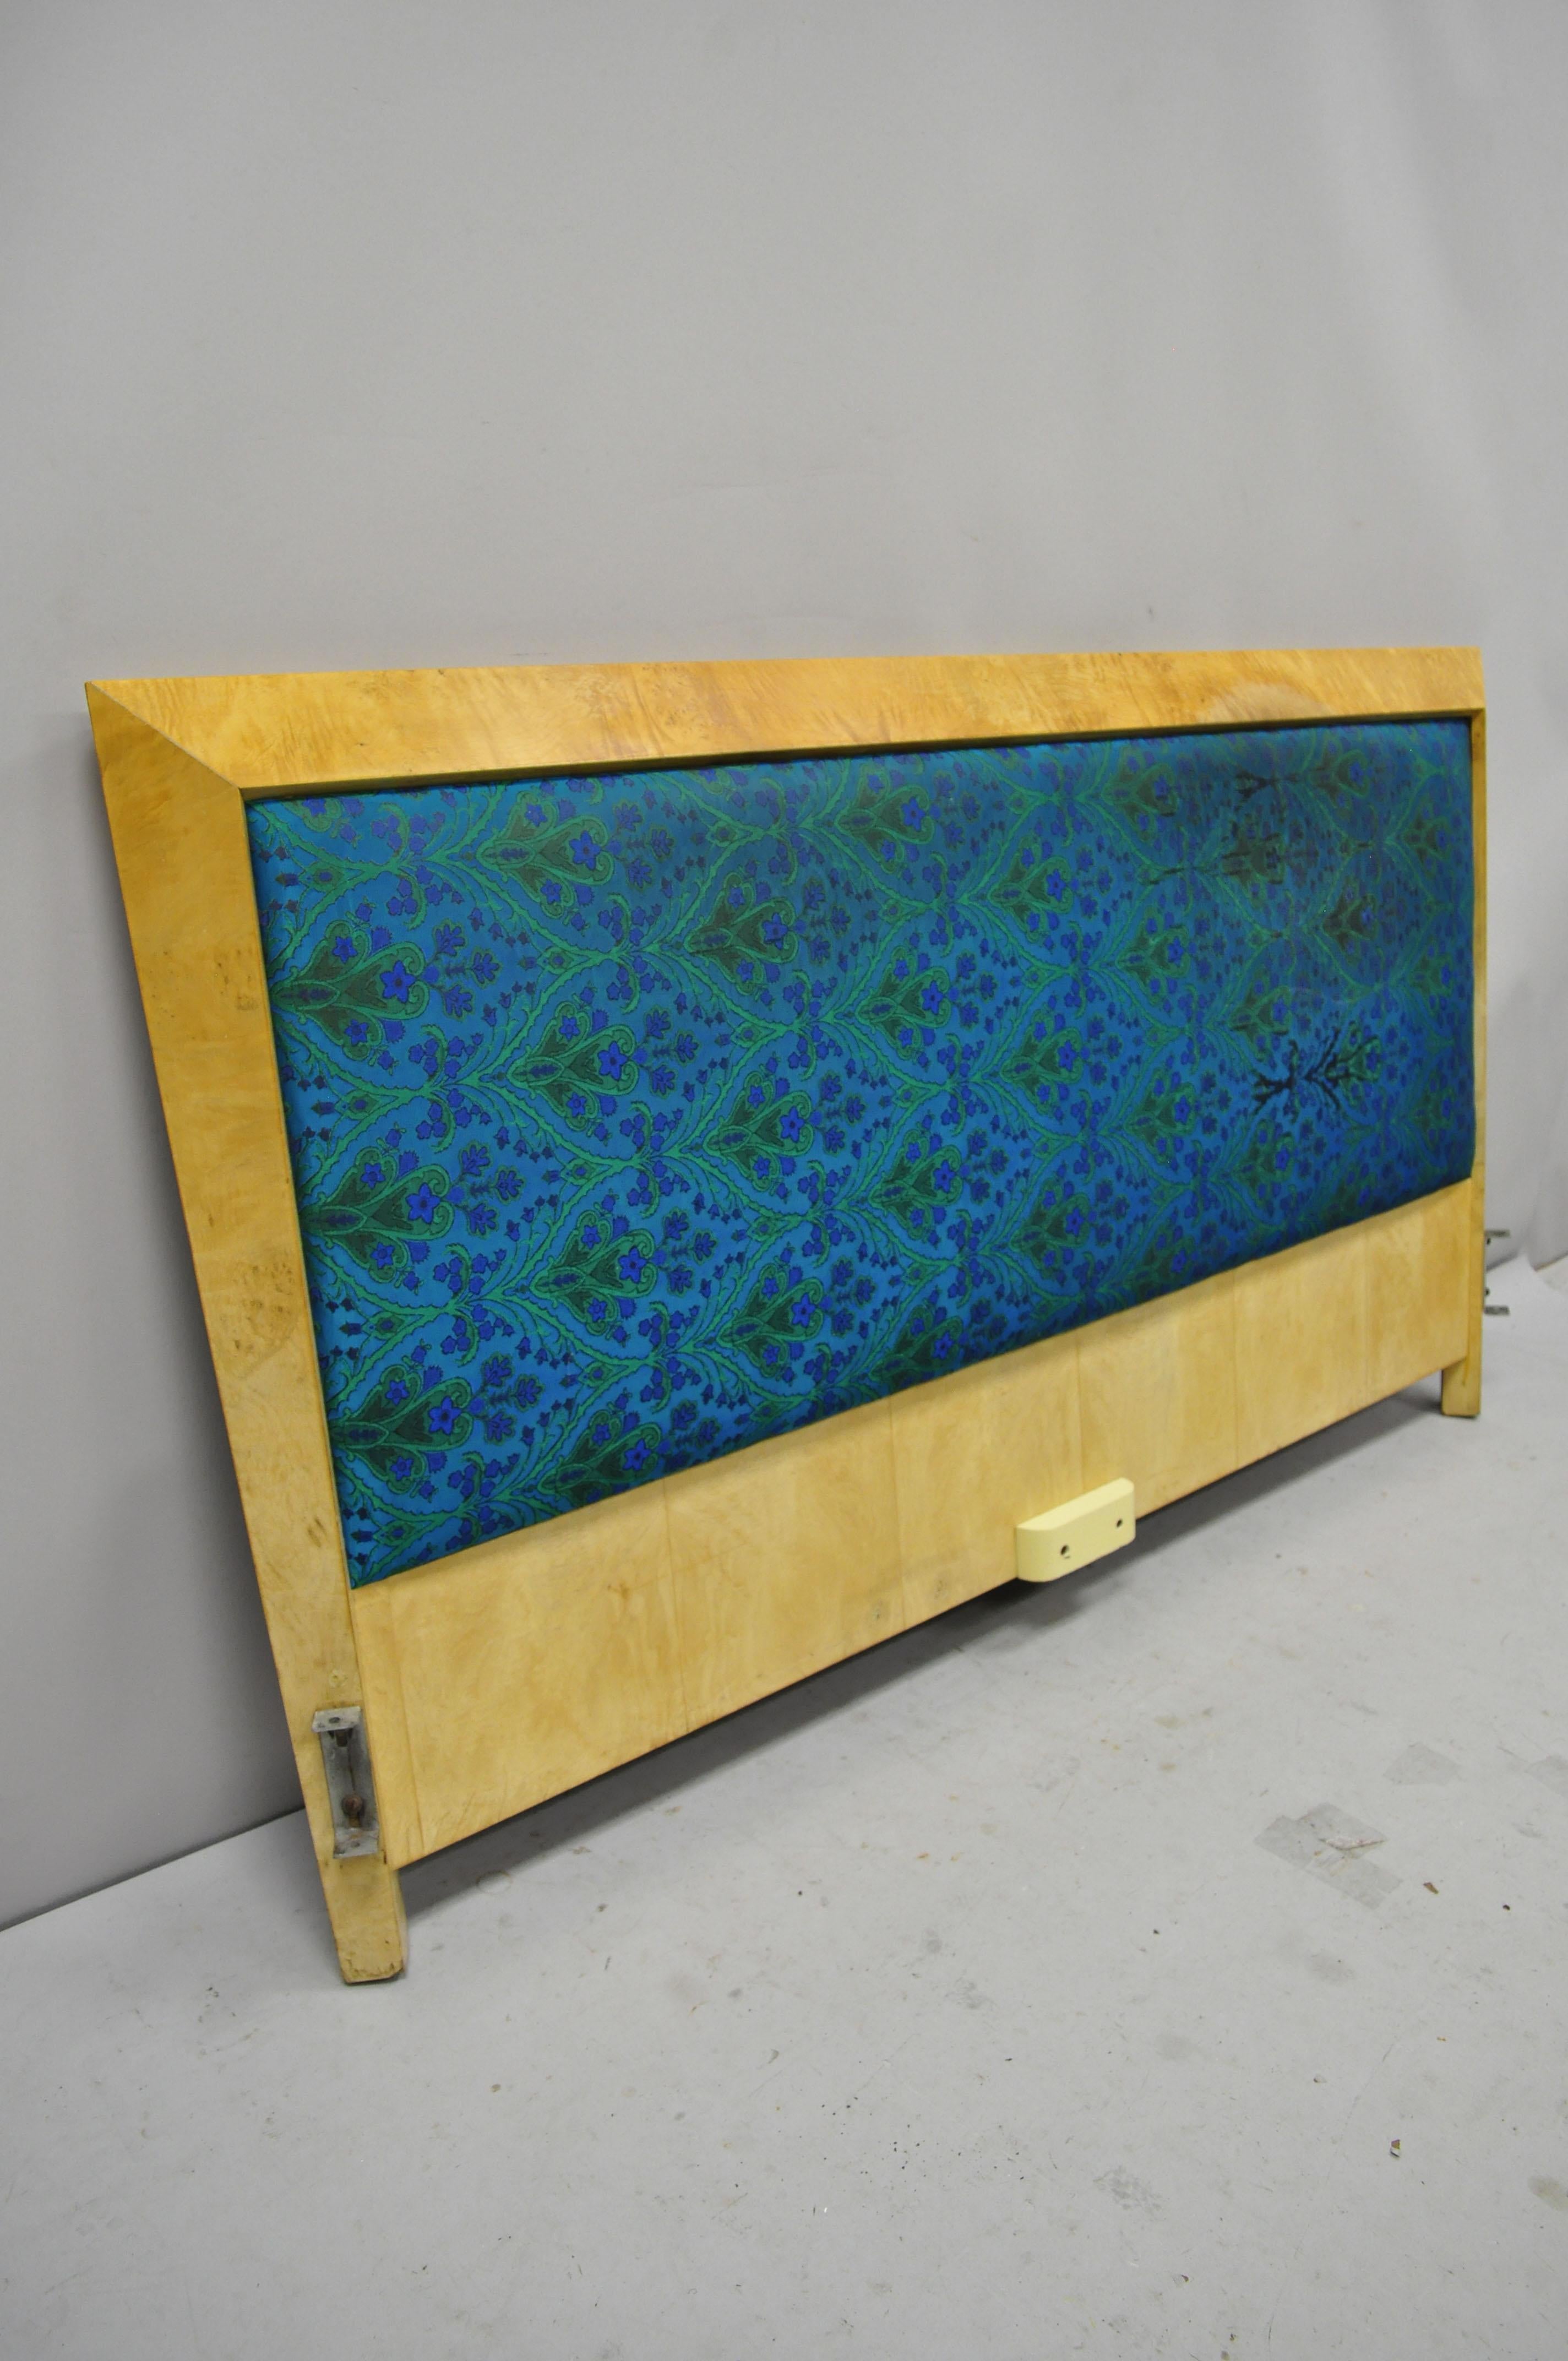 Mid-Century Modern Art Deco Burl Wood Queen Size Birdseye Maple Upholstered Headboard. Item features upholstered panel, beveled edges, queen size headboard, beautiful wood grain, quality American craftsmanship, low and sleek sculptural form. Circa